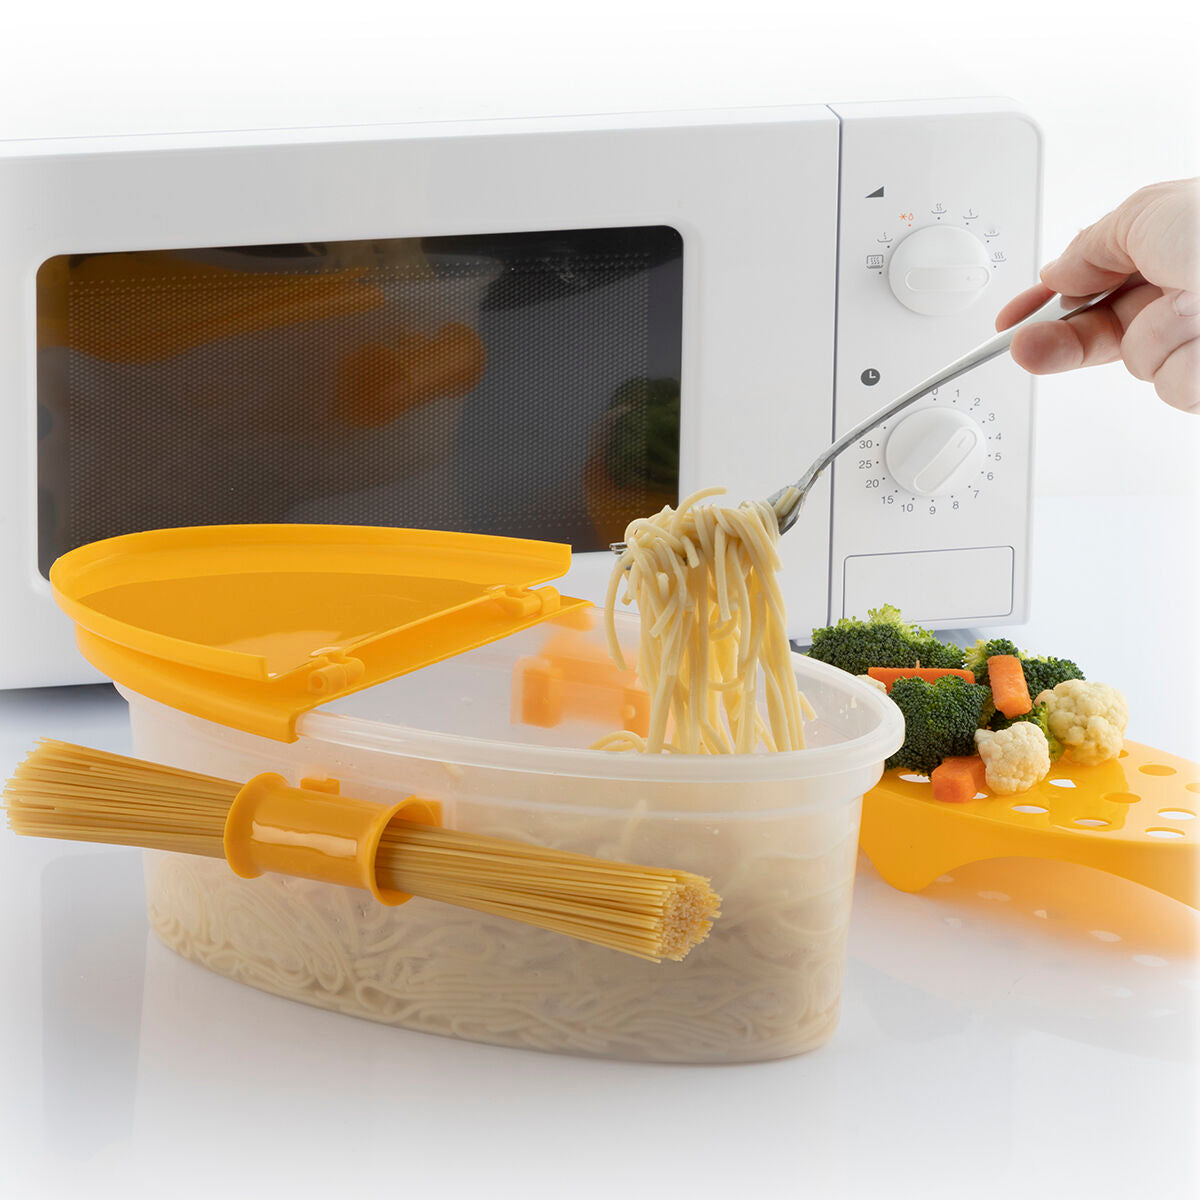 4-in-1 Microwave Pasta Cooker with Accessories and Recipes Pastrainest InnovaGoods